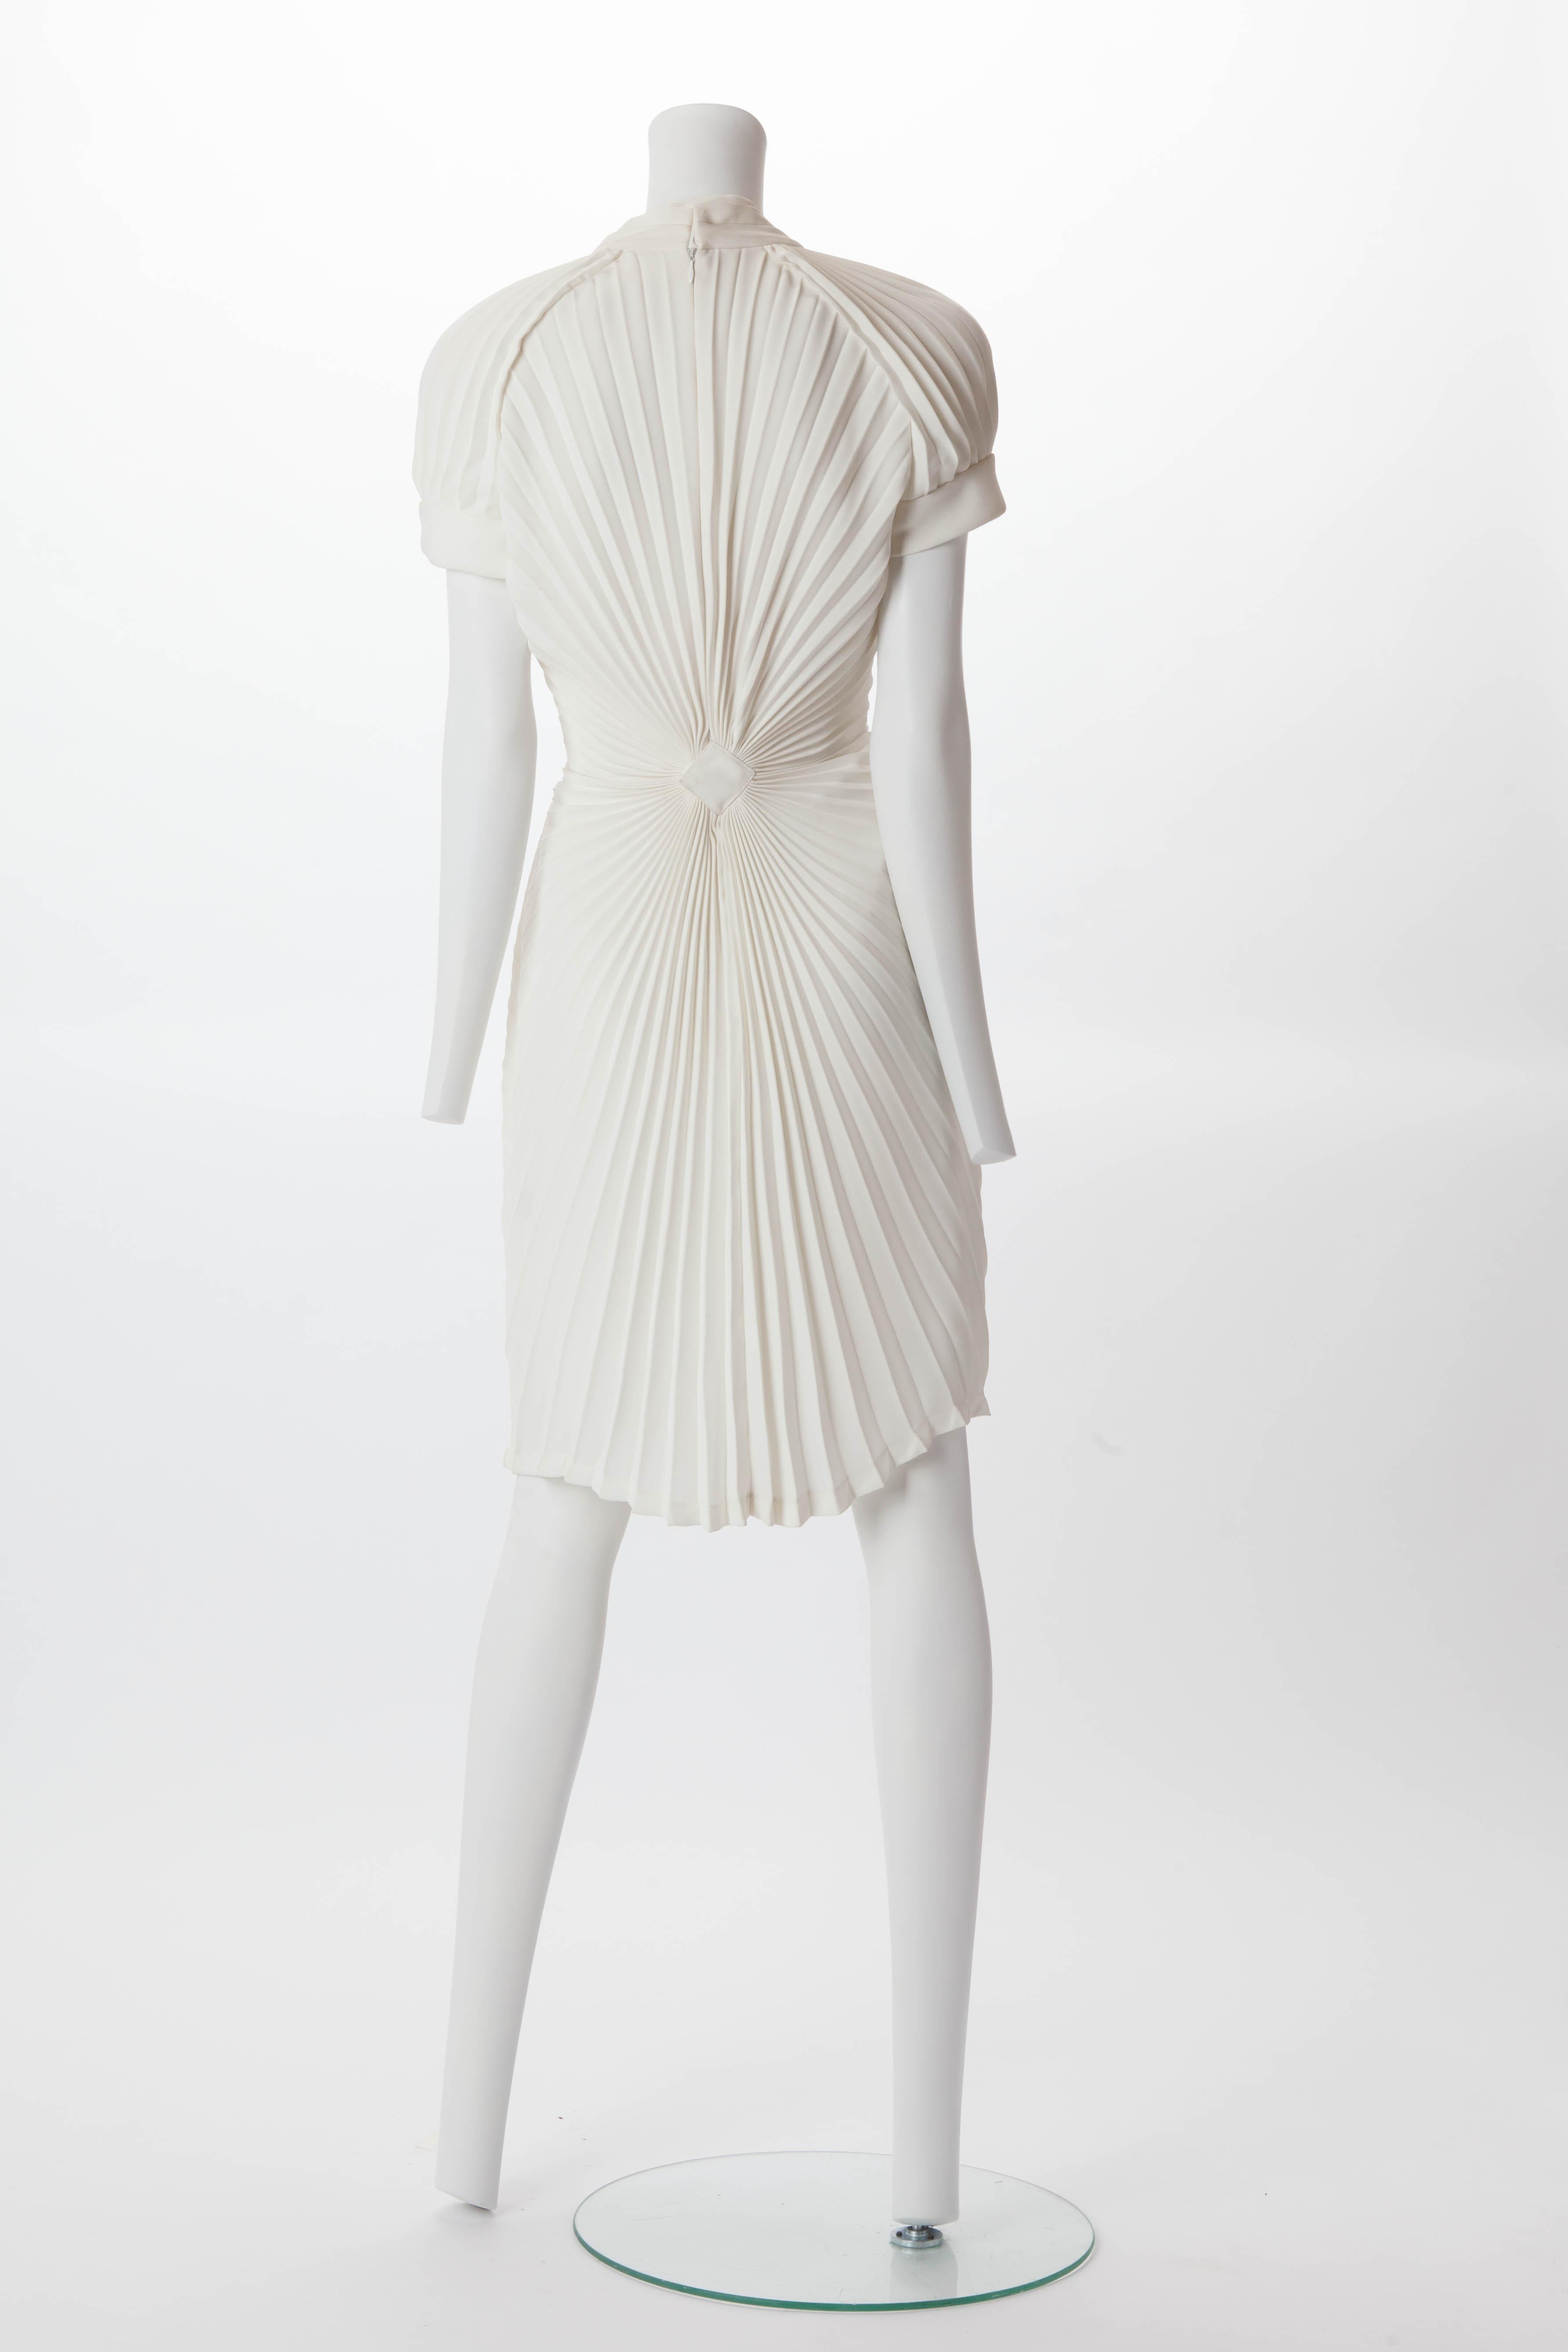 Women's Thierry Mugler S/S 1994 White Pleated Dress For Sale